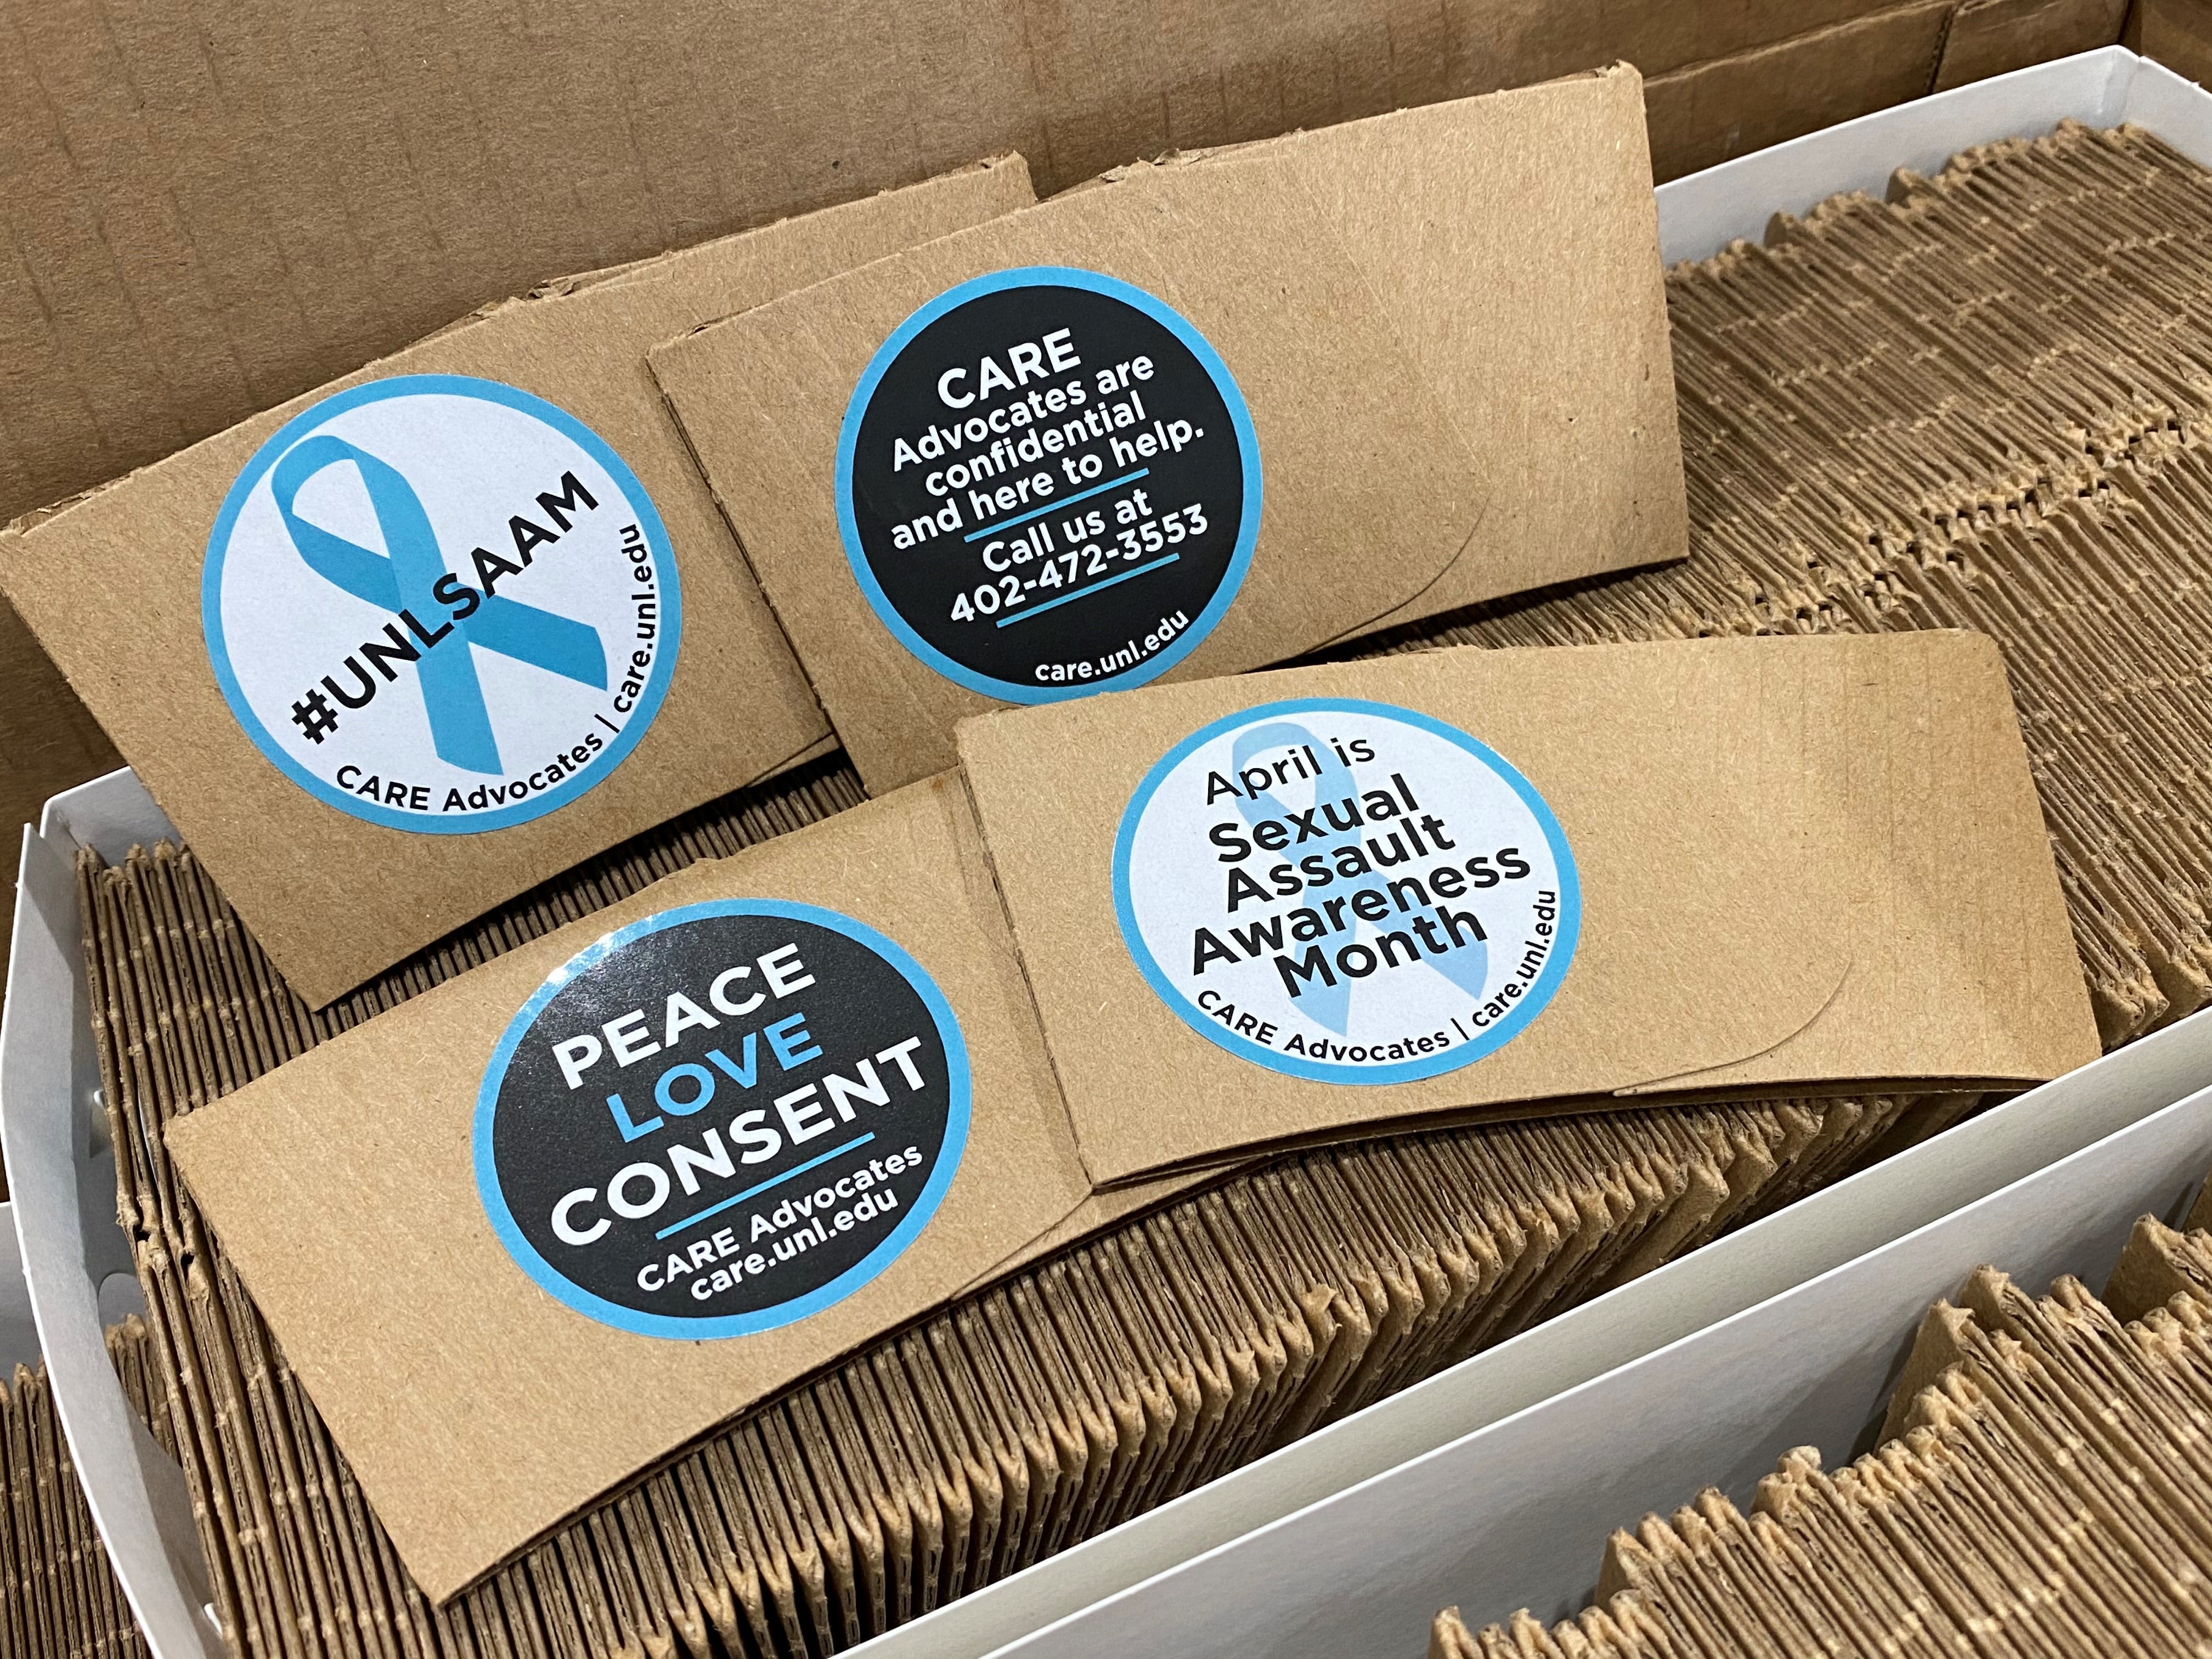 Coffee sleeves with messages promoting Sexual Assault Awareness Month